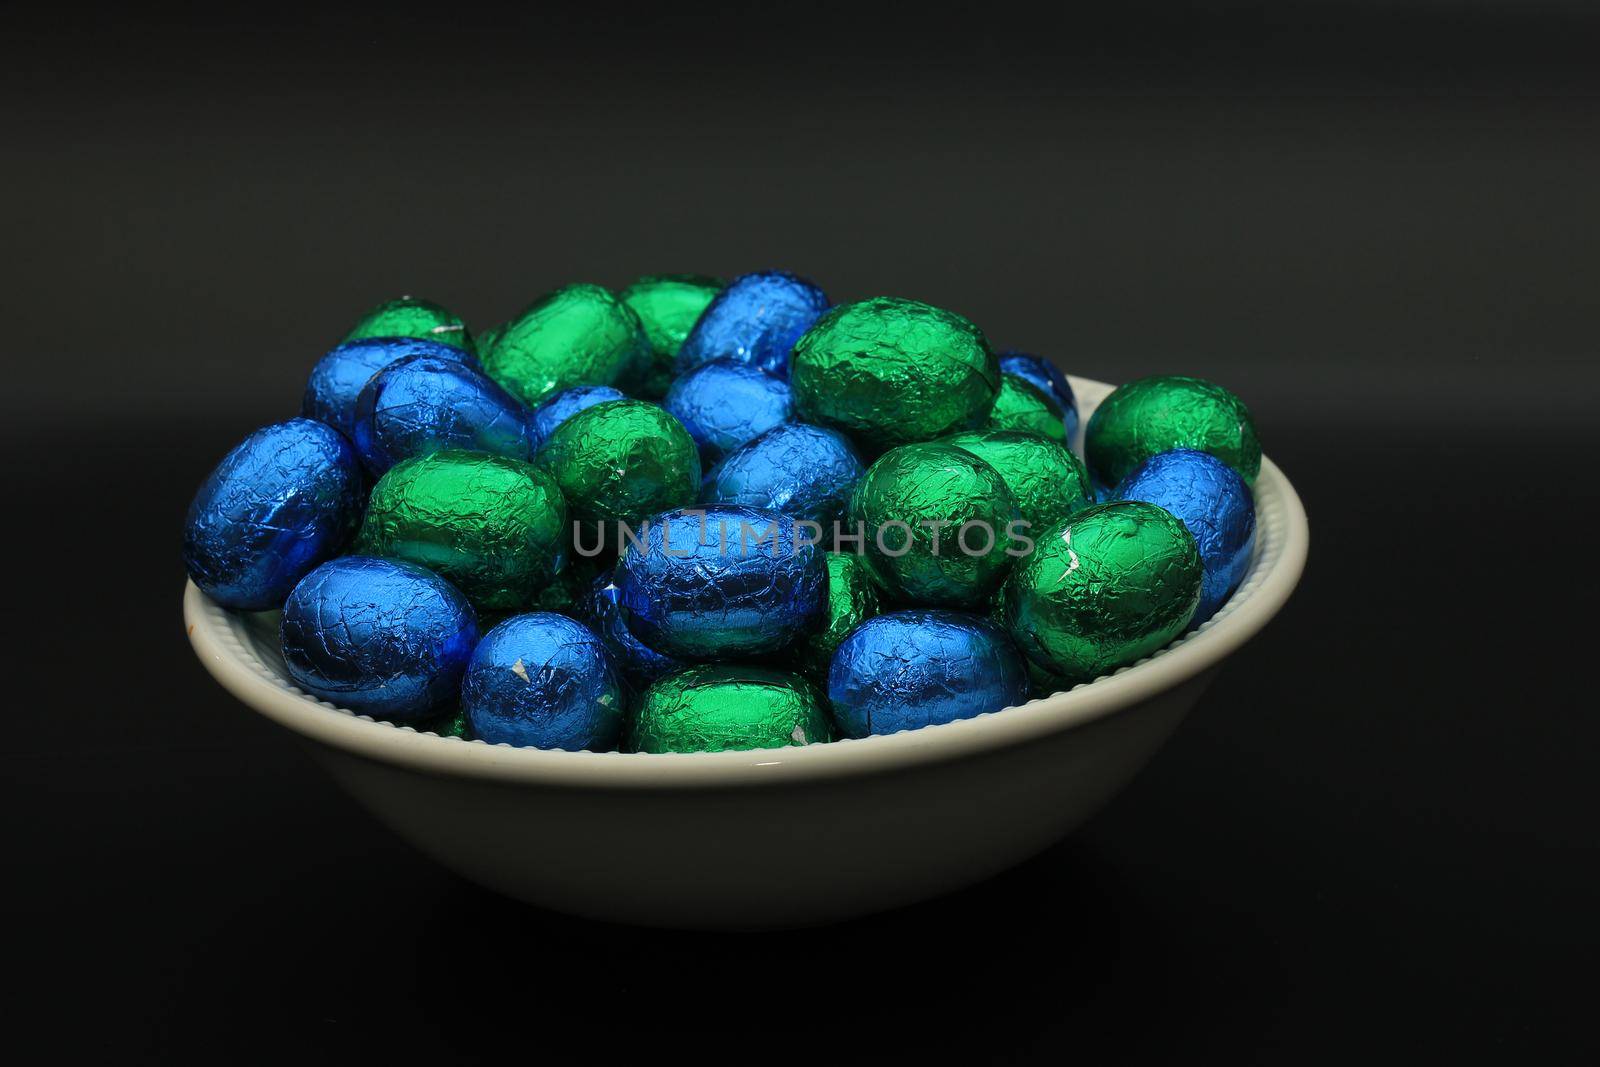 Foil wrapped chocolate easter eggs in a white porcelain bowl